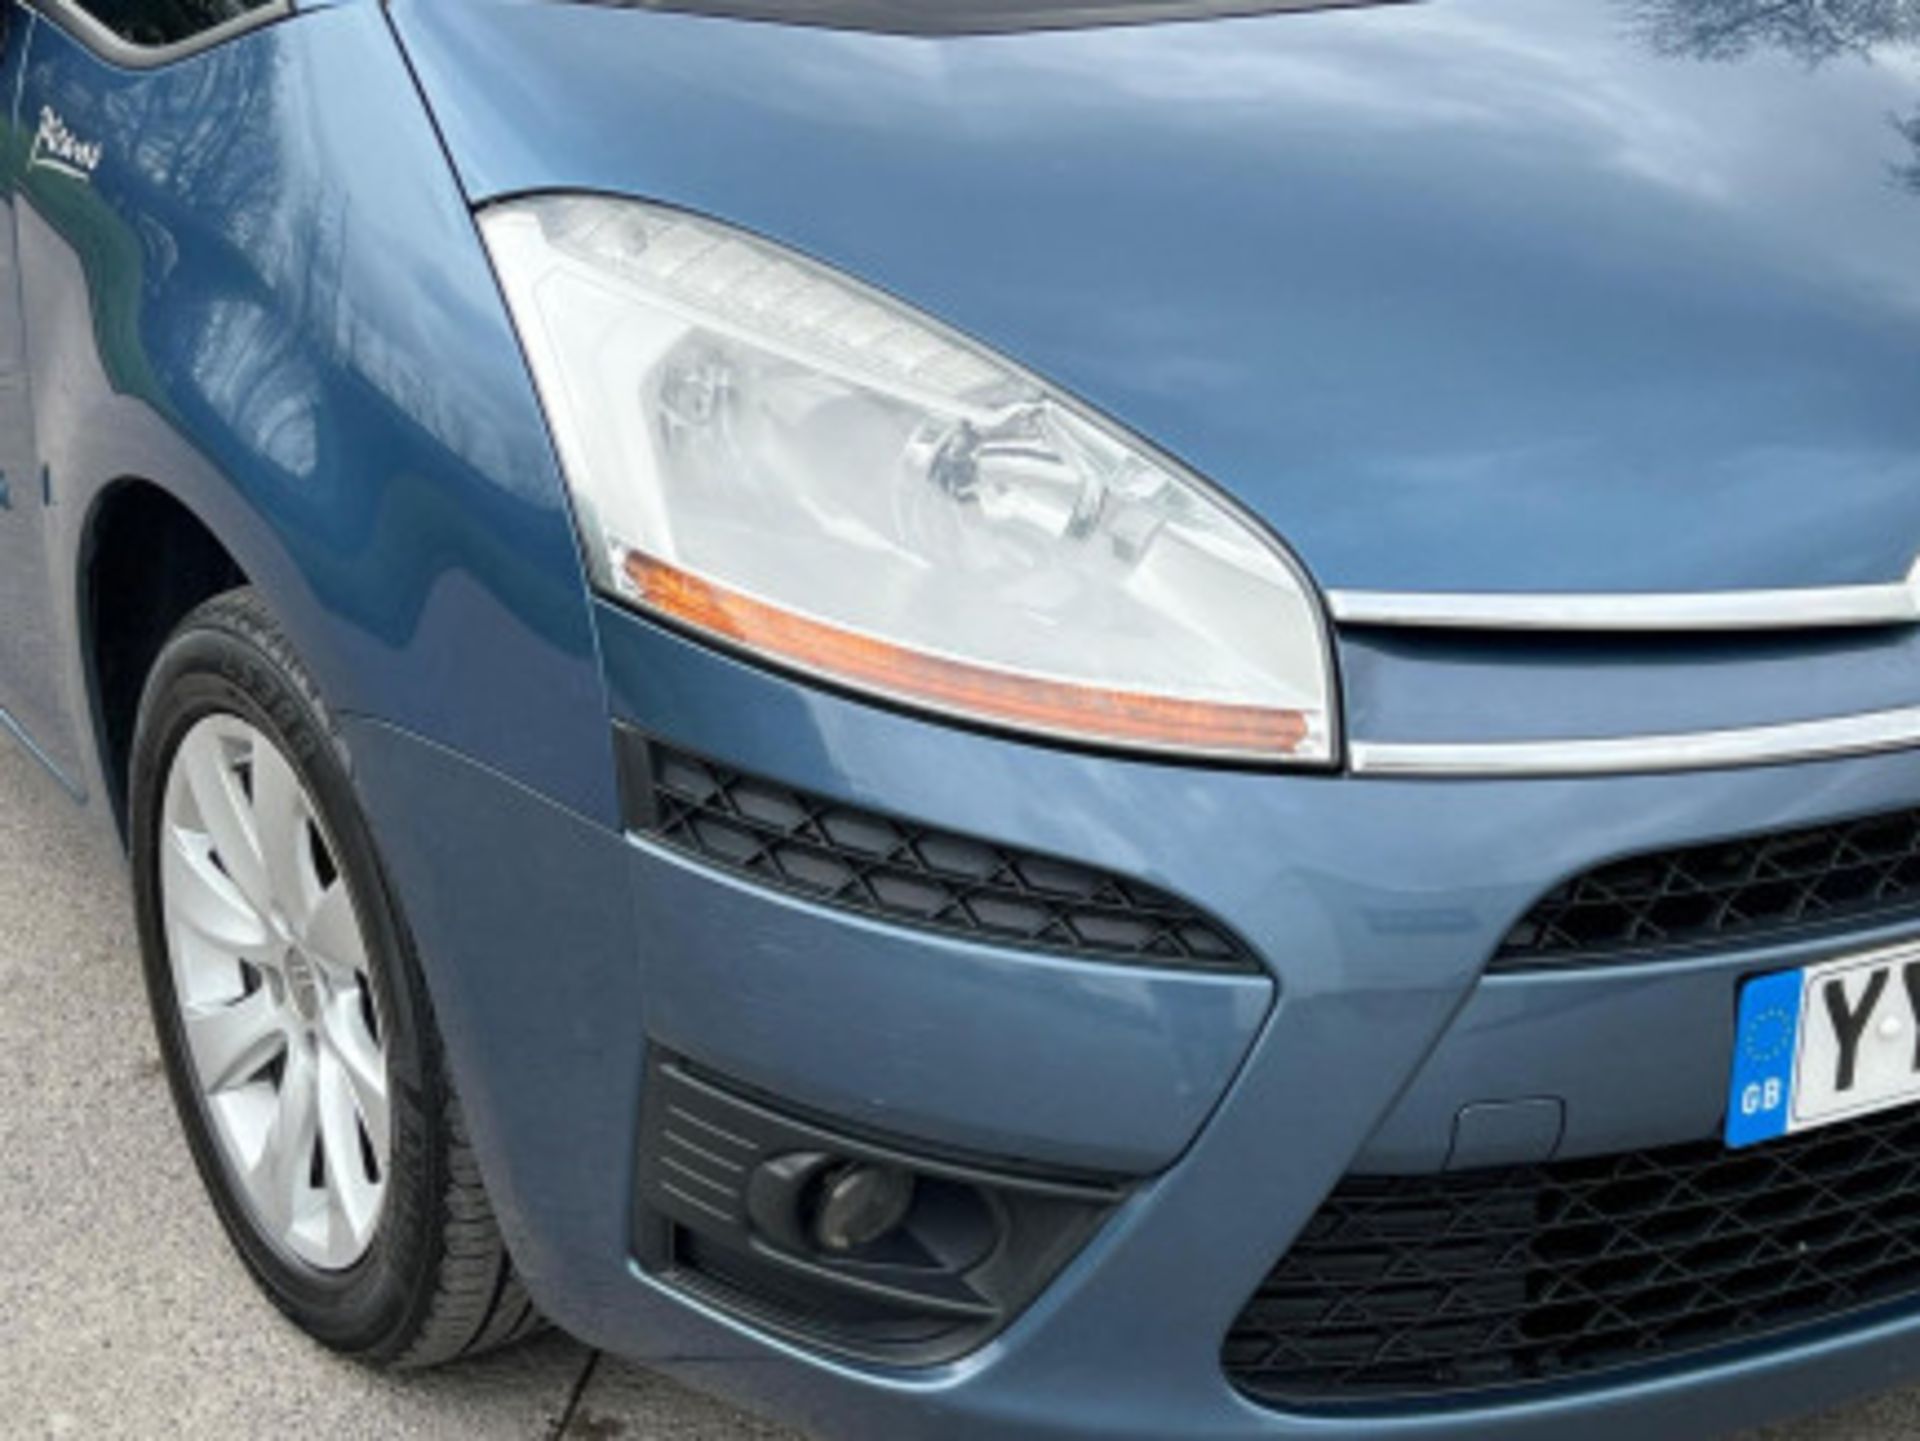 2009 CITROEN C4 PICASSO 1.6 HDI VTR+ EGS6 5DR >>--NO VAT ON HAMMER--<< - Image 36 of 123